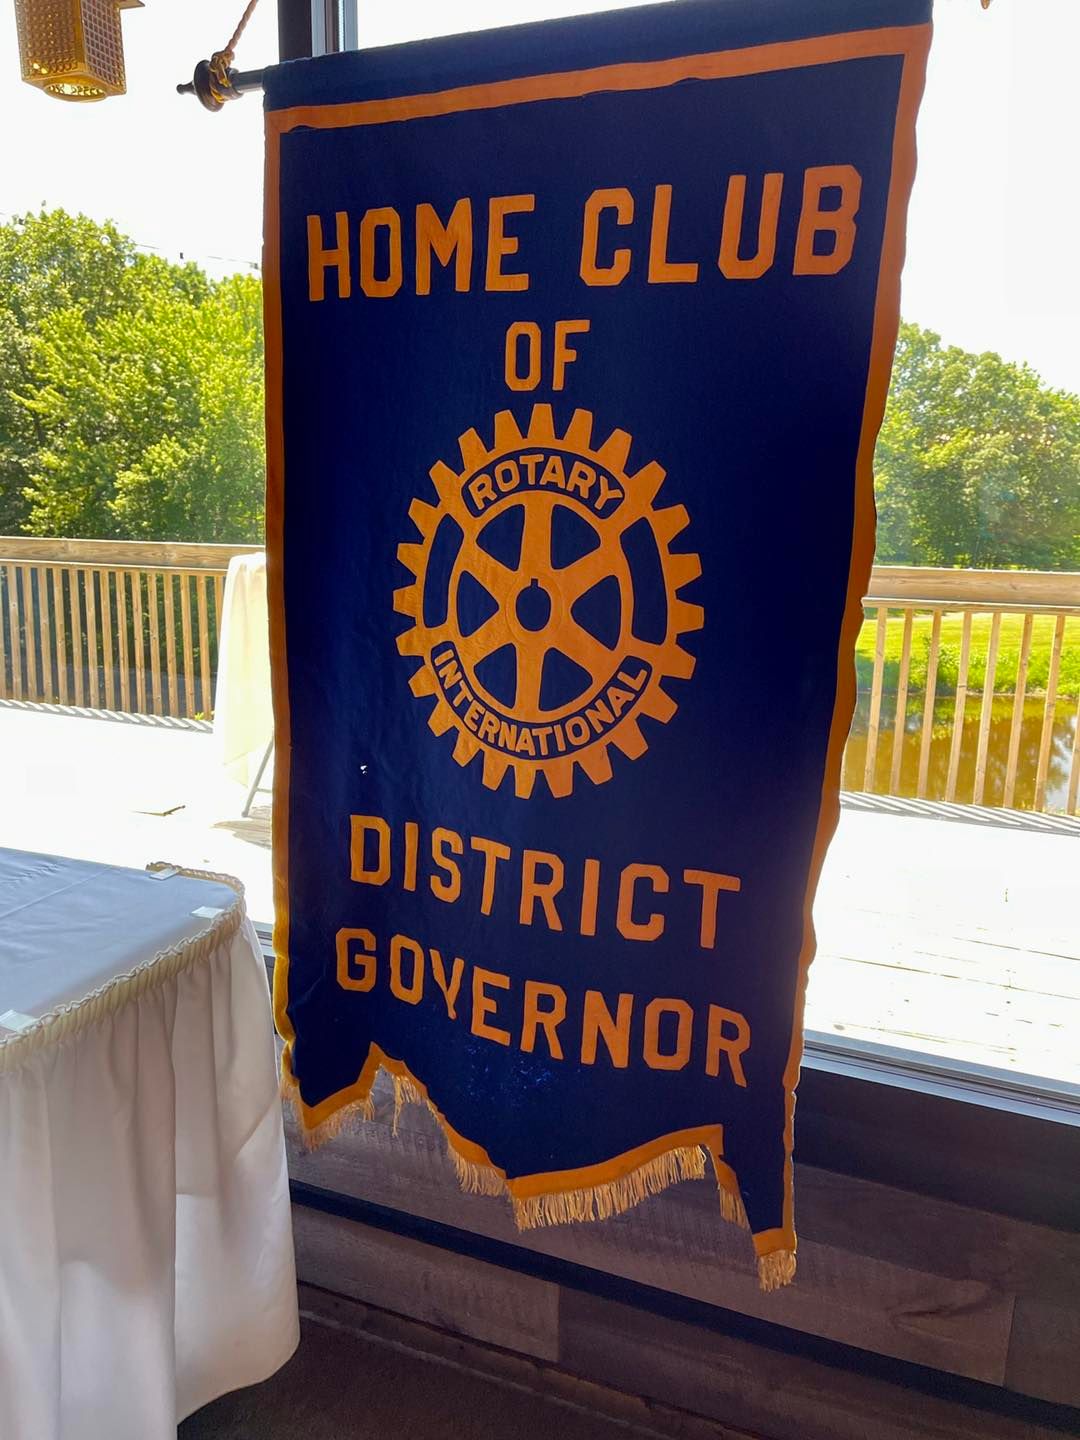 Marshfield Rotary is the home club of District Governor Ben Bauer